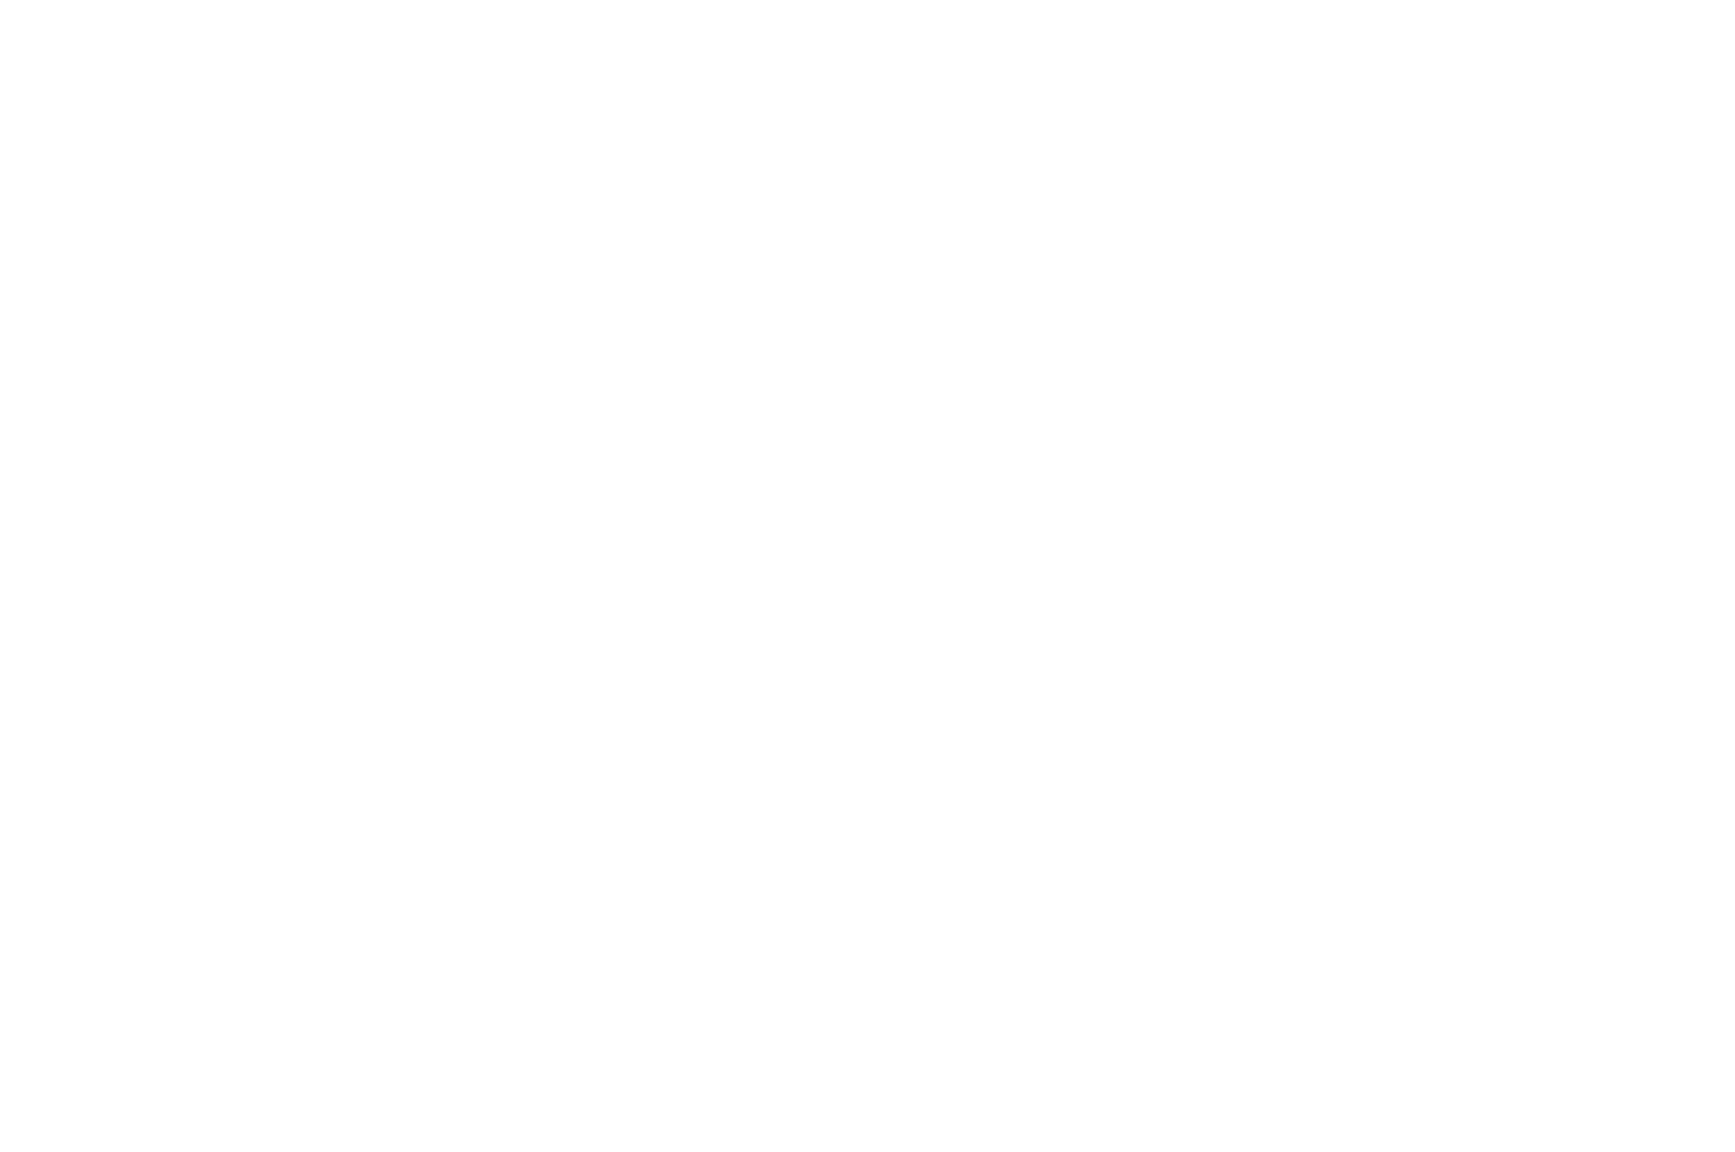 OFFICIAL SELECTION - Black Sunday Film Festival - 2022 (1).png